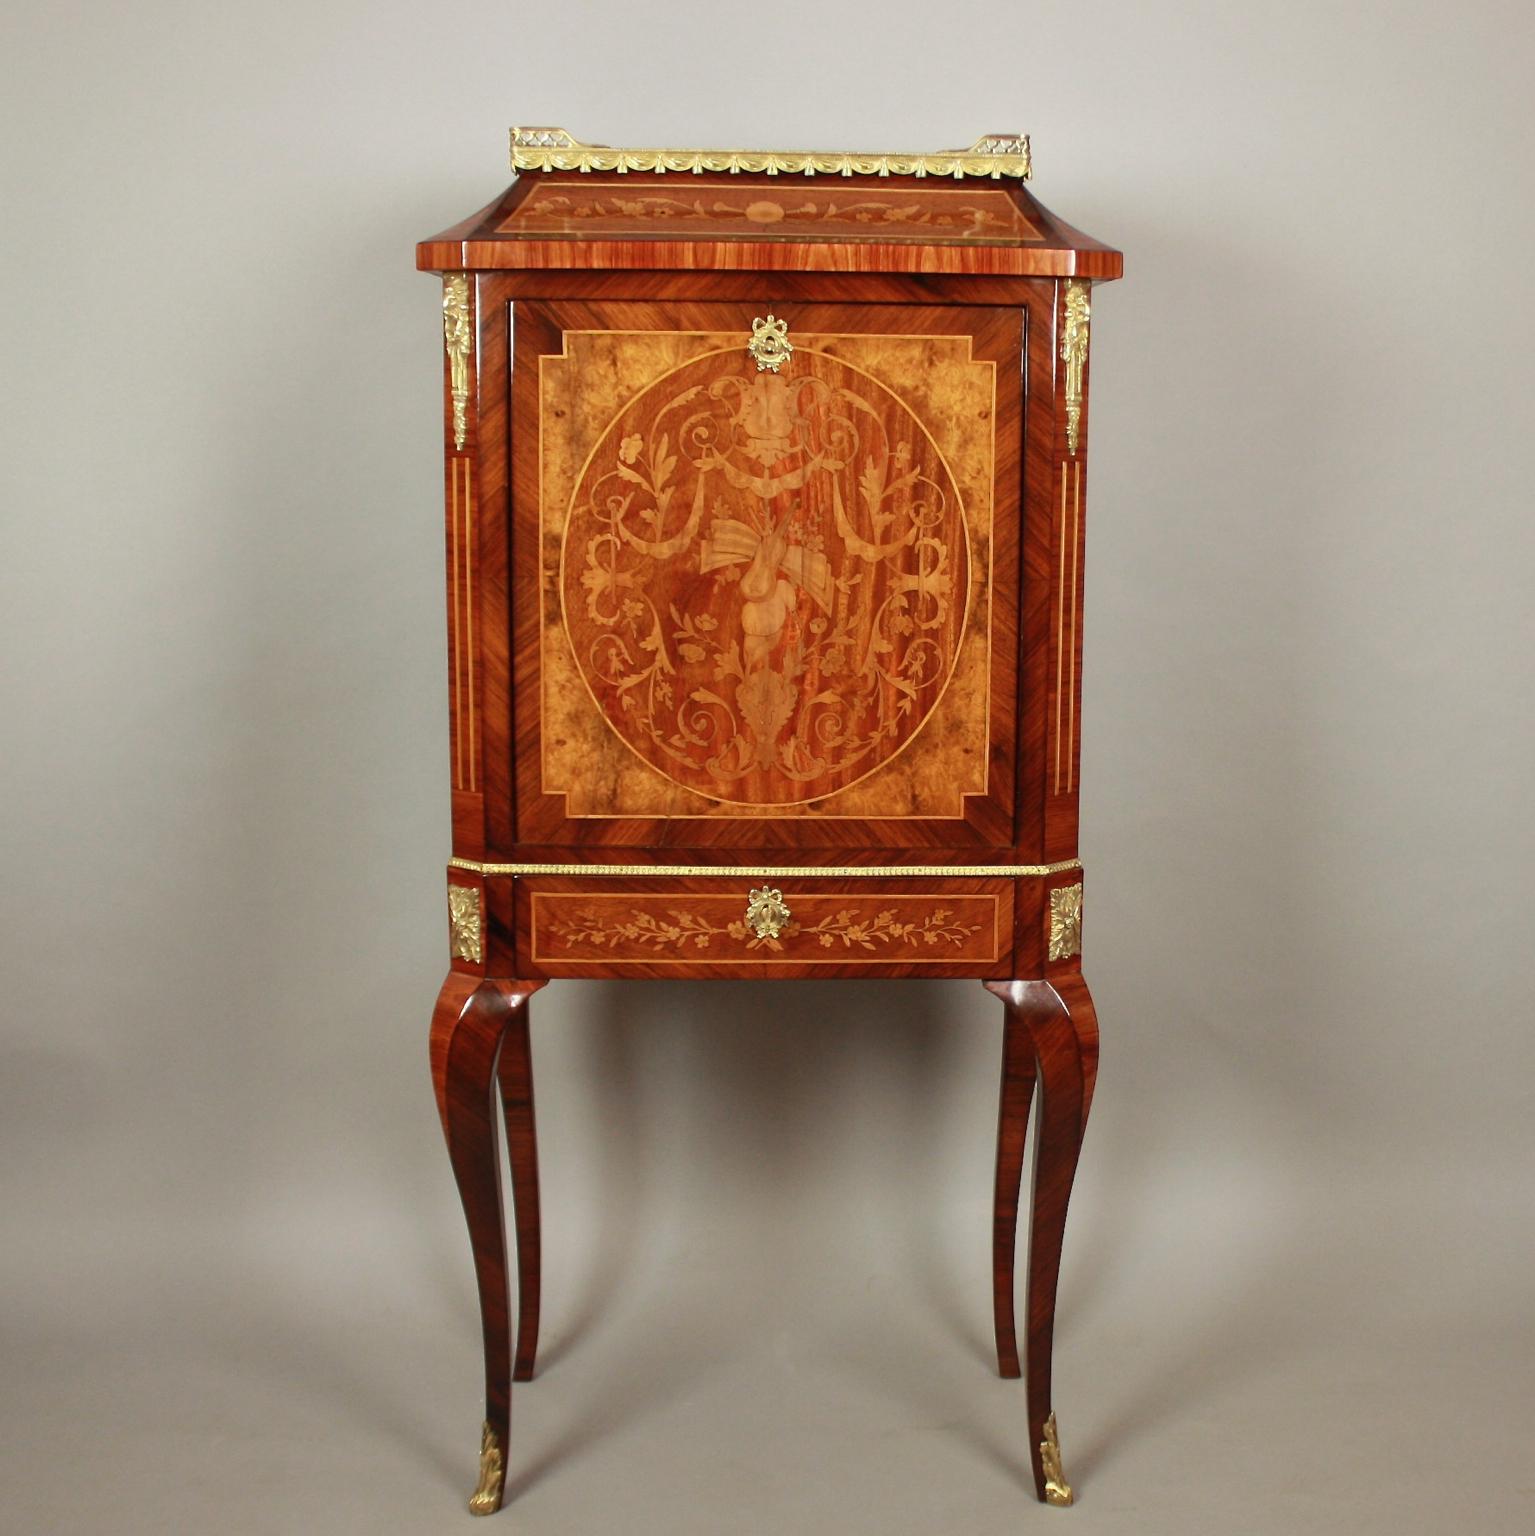 19th Century Louis XVI Floral and Musical Instruments Marquetry Writing Cabinet or Lady's Secrétaire, also called 